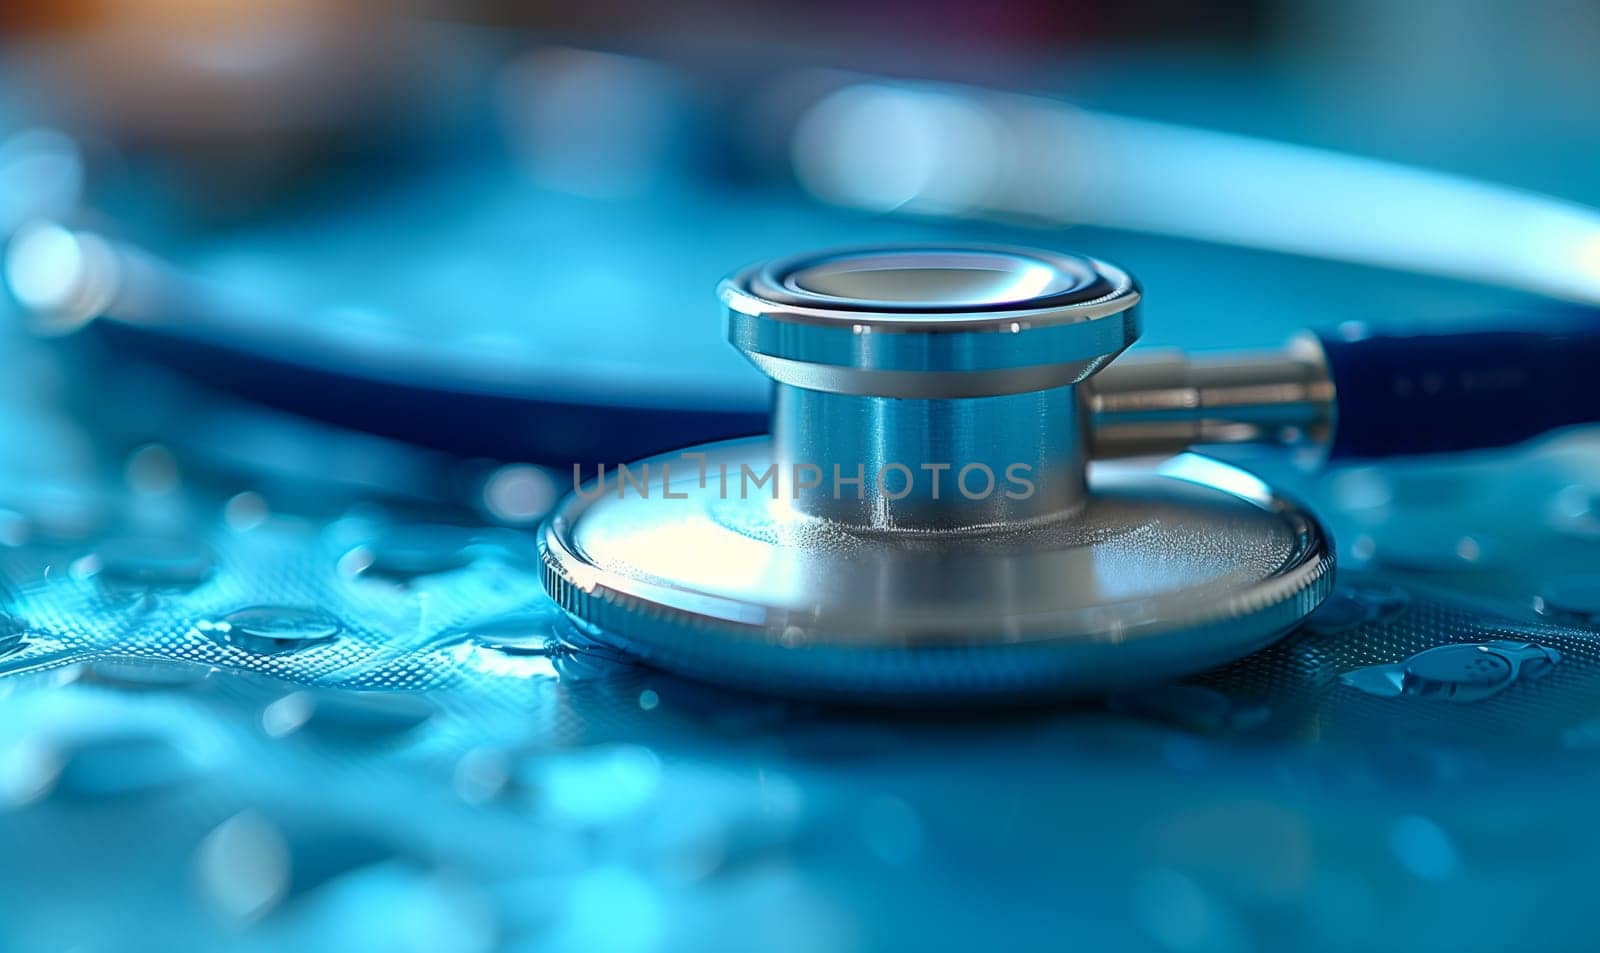 Macro photography of stethoscope on electric blue surface by richwolf